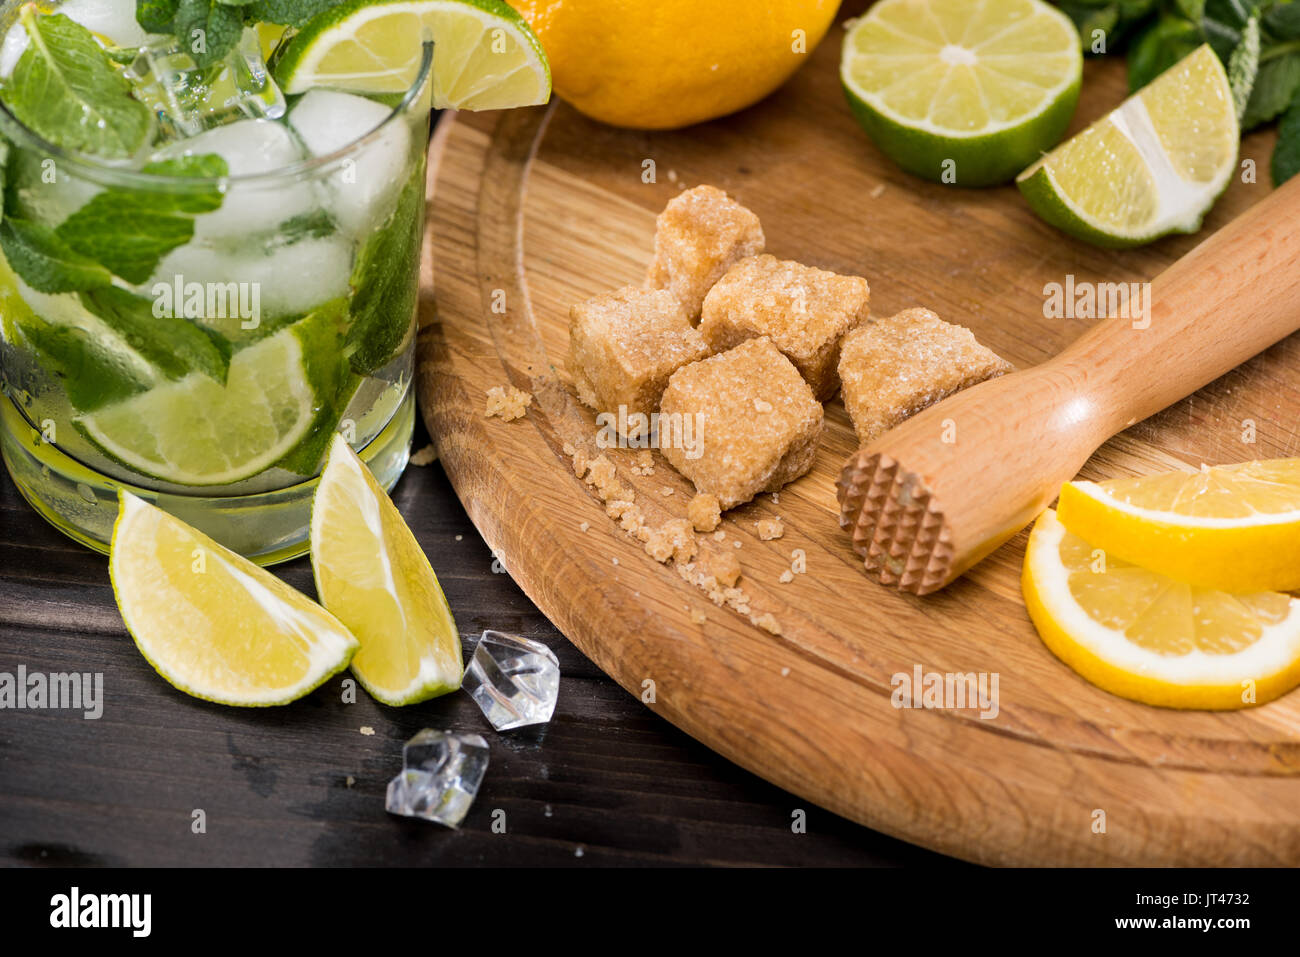 Close-up view of mojito cocktail in glass, crushed sugar, limes and ice cubes on table, cocktail drinks concept Stock Photo